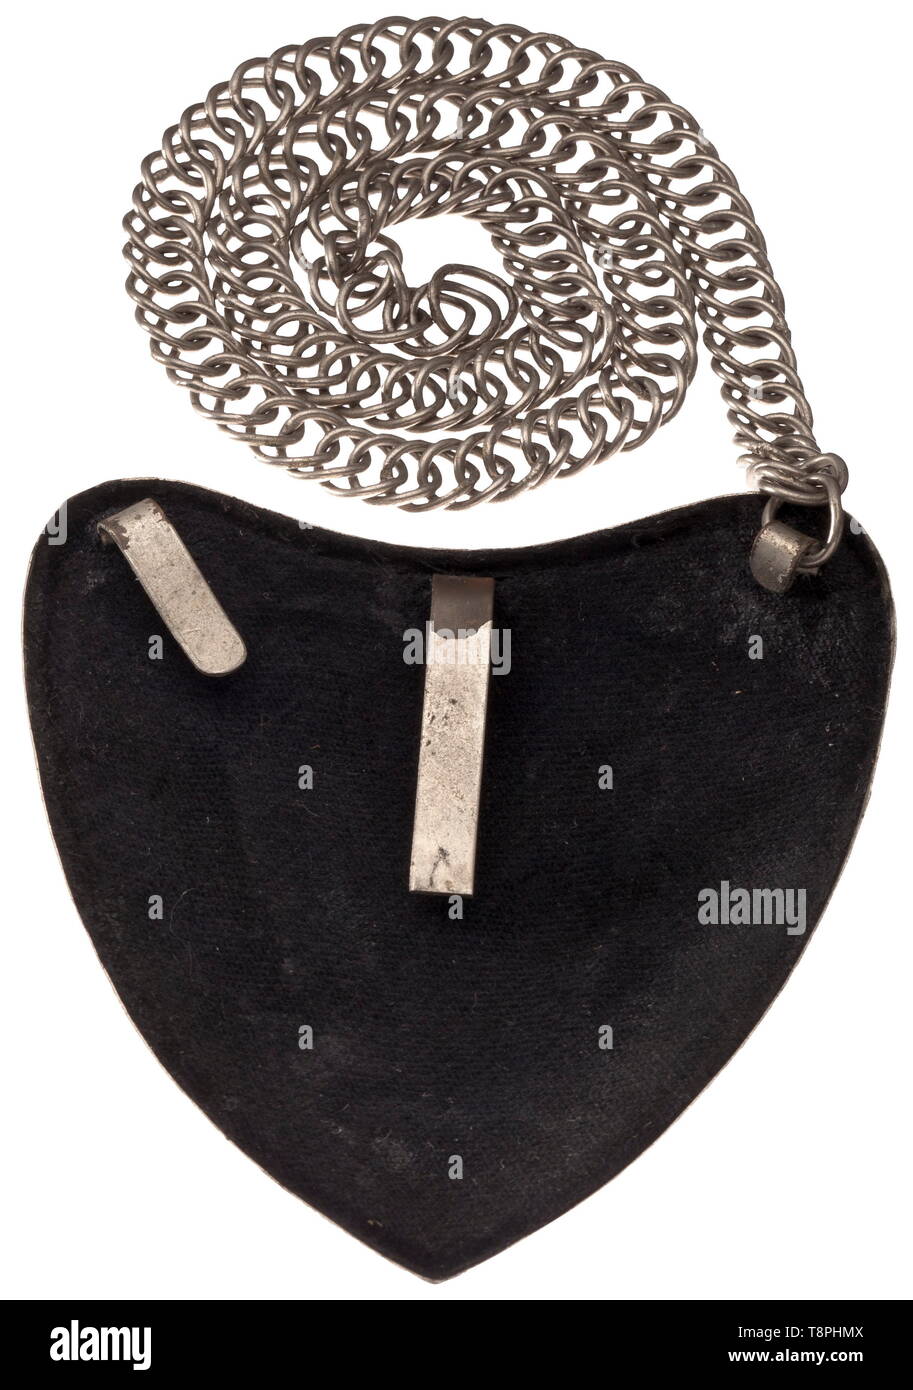 A gorget for standart bearers of the SA variant issue Heart-shaped, nickel-plated and polished shield with gilt corner rosettes. At the centre a pin-affixed, eight-rayed silvered sun with a silvered SA eagle on a red enamelled disc. Unrounded arresting clasp, black liner, nickel-plated chain. The usage of this gorget is unknown. From the 1920s on, many different gorgets were worn by flag bearers. Deeter/Odegard depict it on p. 28 of 'Gorgets of the Third Reich' and consider it a model for the open market. It may also be a specimen piece for a sales agent, used by SA corps l, Editorial-Use-Only Stock Photo